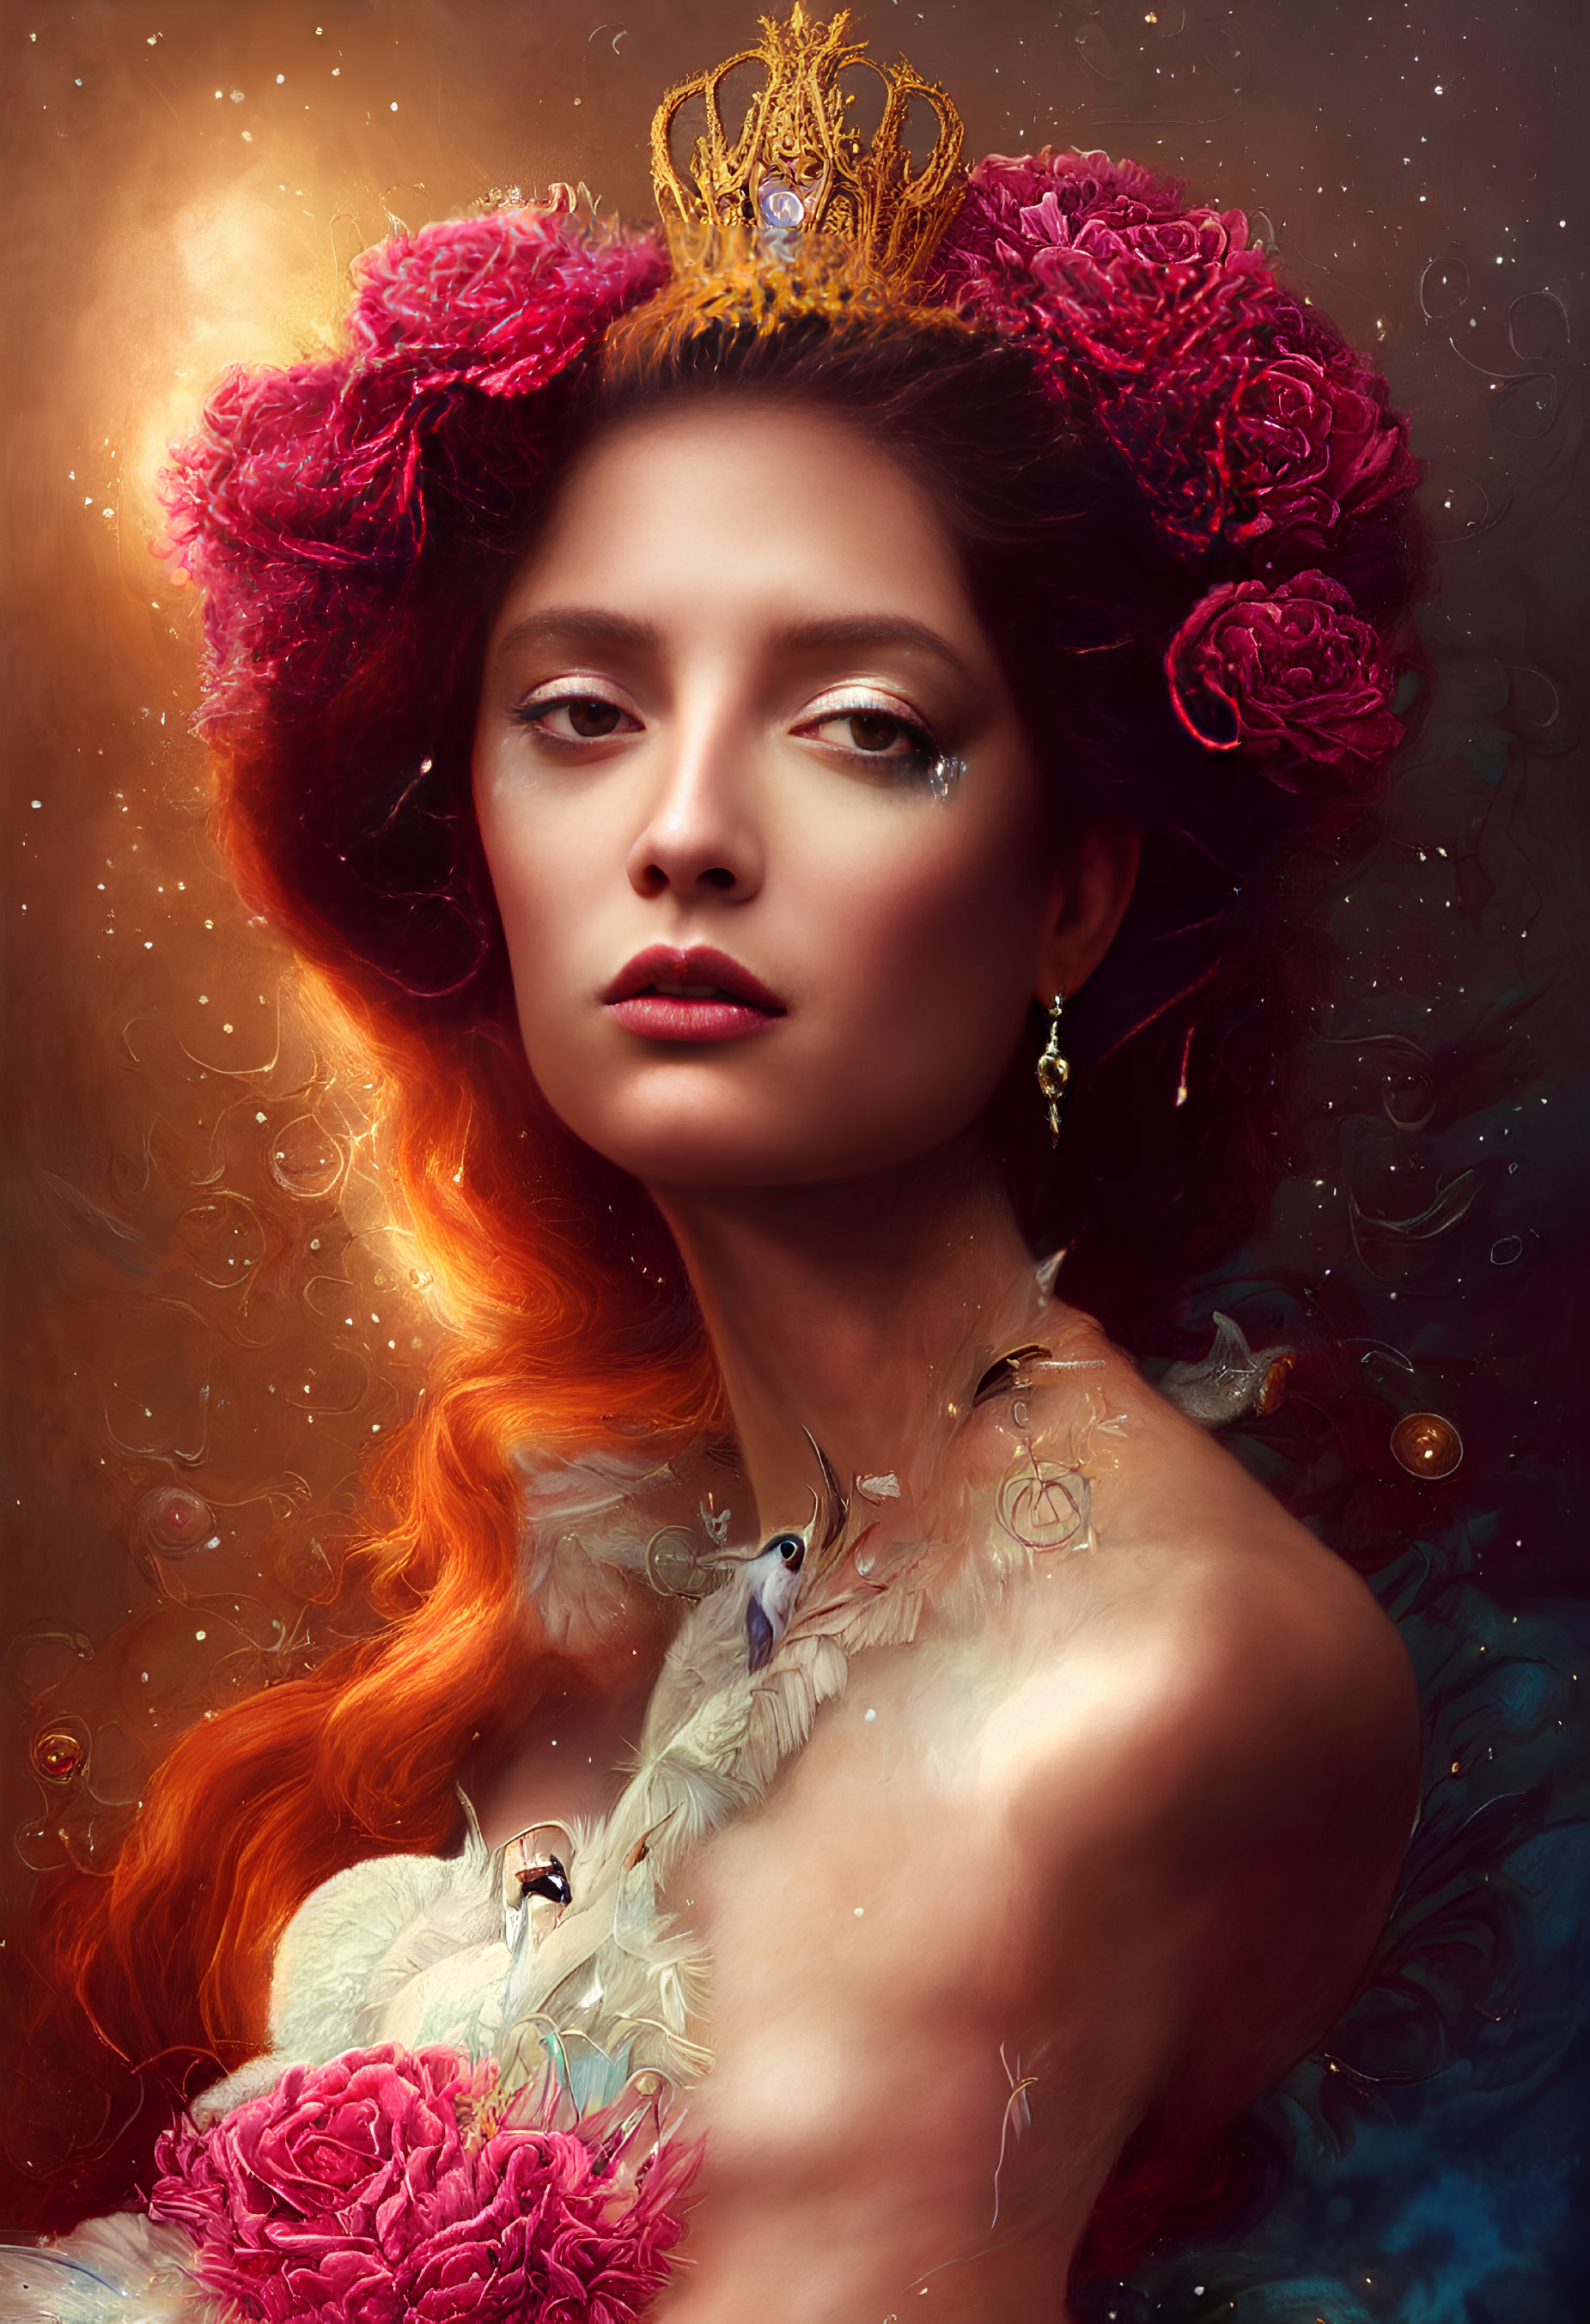 Regal woman with golden crown and fiery hair amidst mystical glow